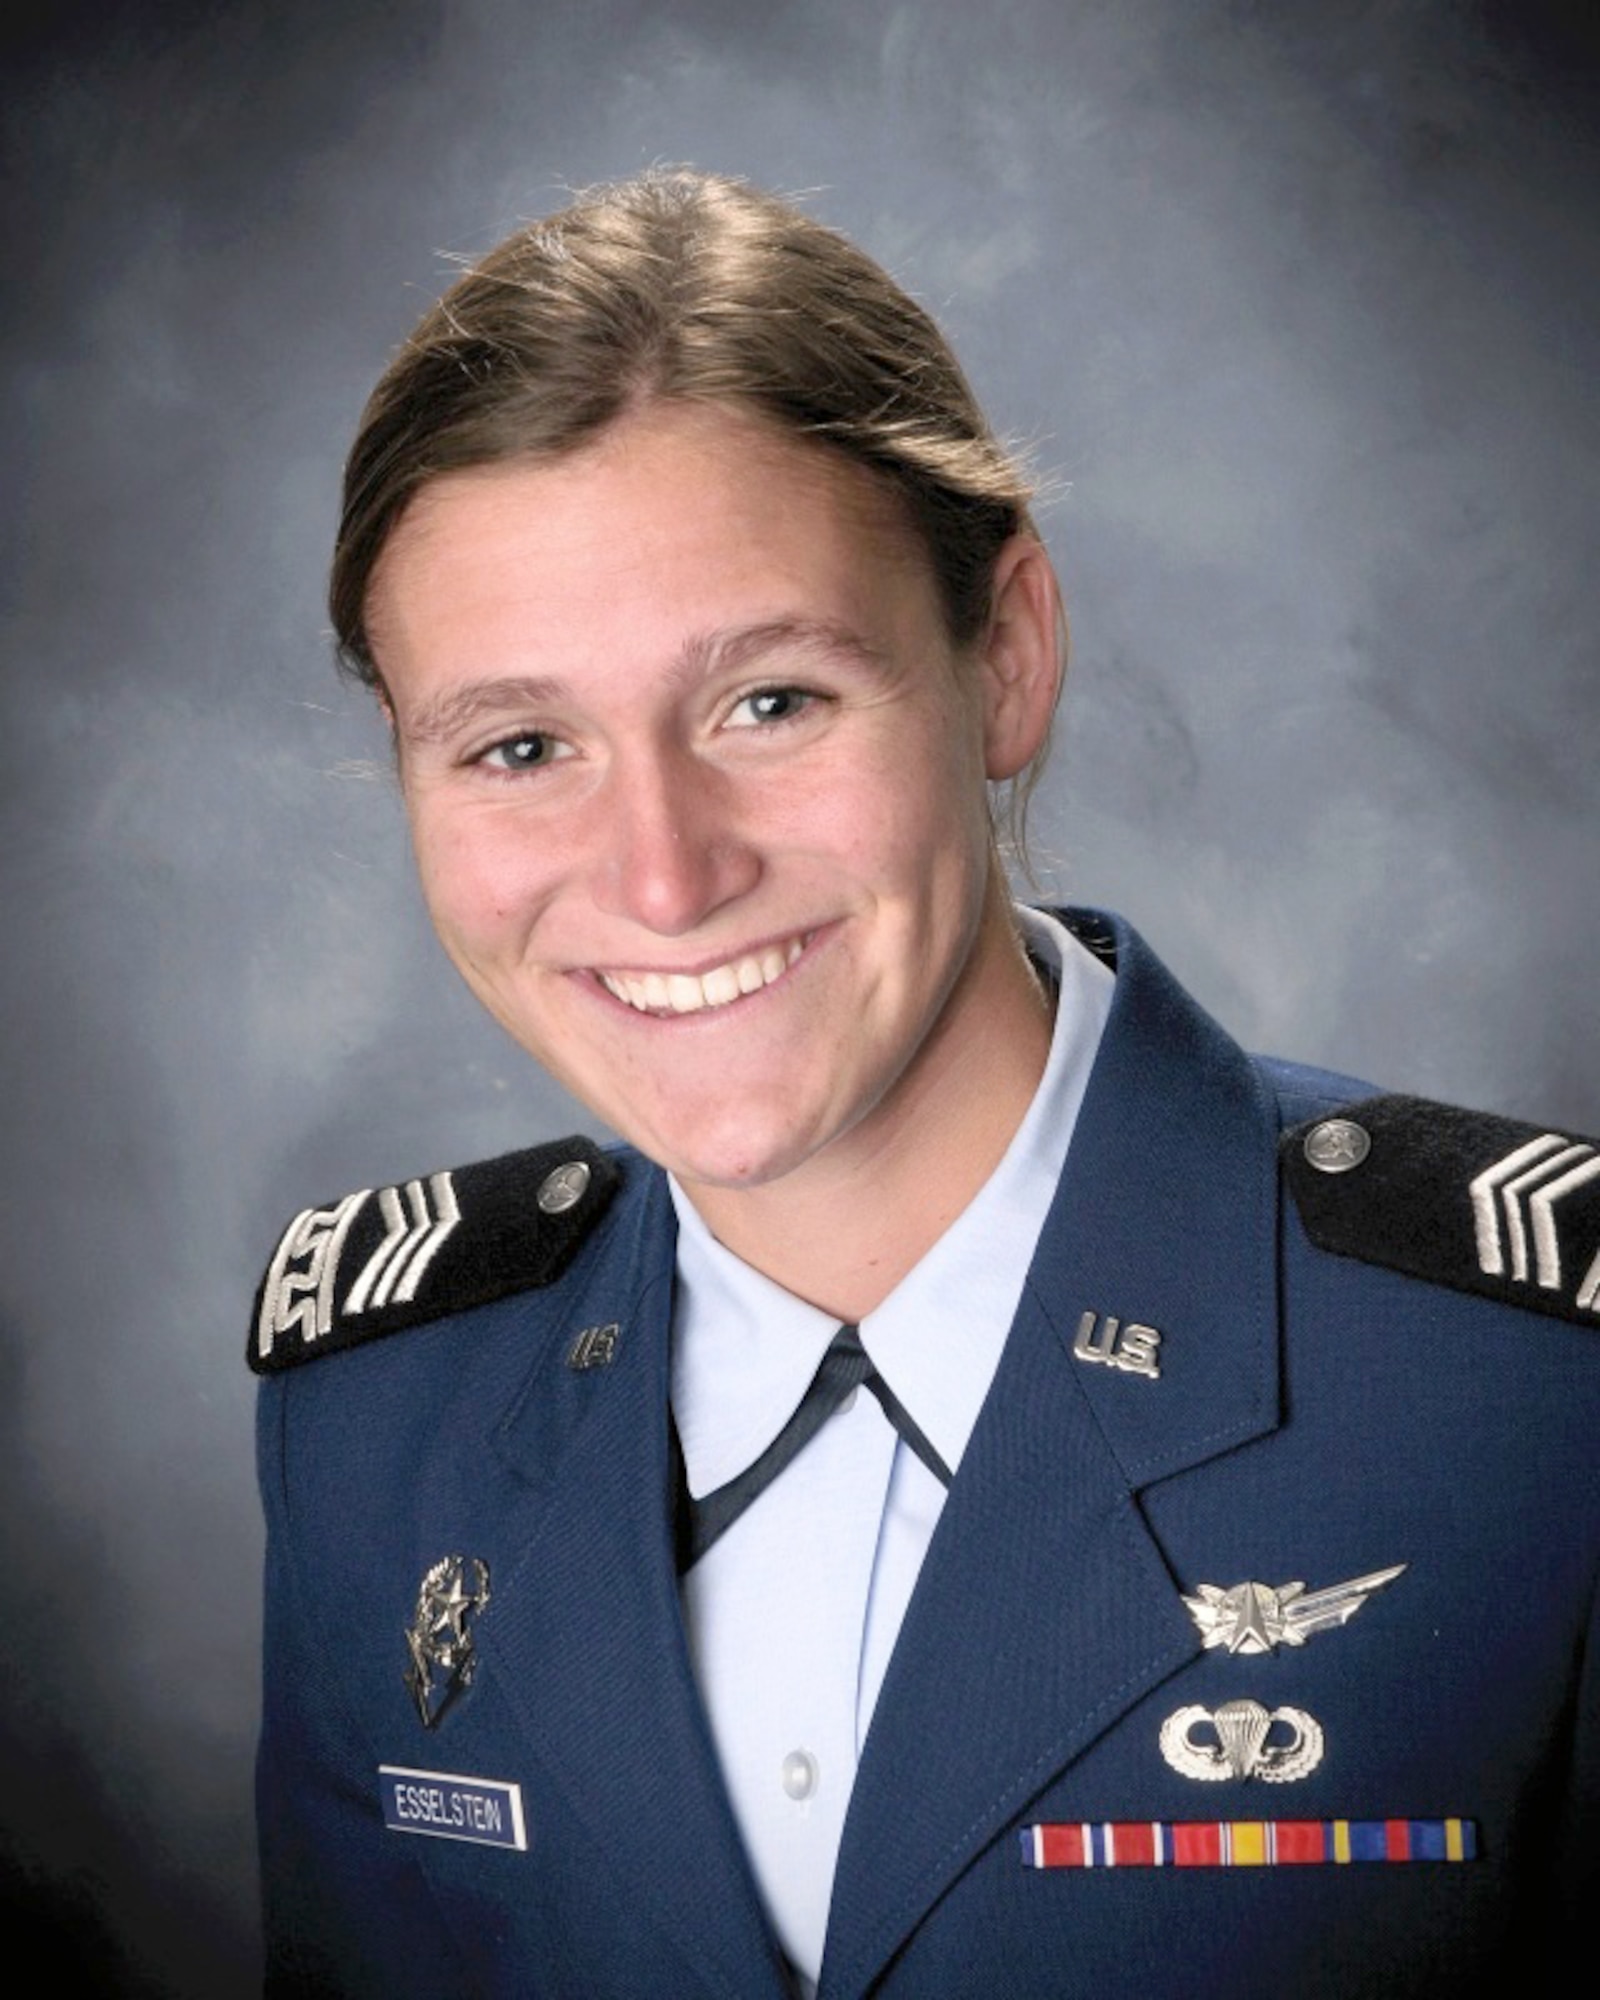 Cadet 1st Class Rebecca Esselstein was named a Rhodes Scholar Nov. 22, making her the Air Force Academy's 38th recipient and the 12th cadet-athlete to earn the honor. Esselstein is a native of Dayton, Ohio. (U.S. Air Force photo)